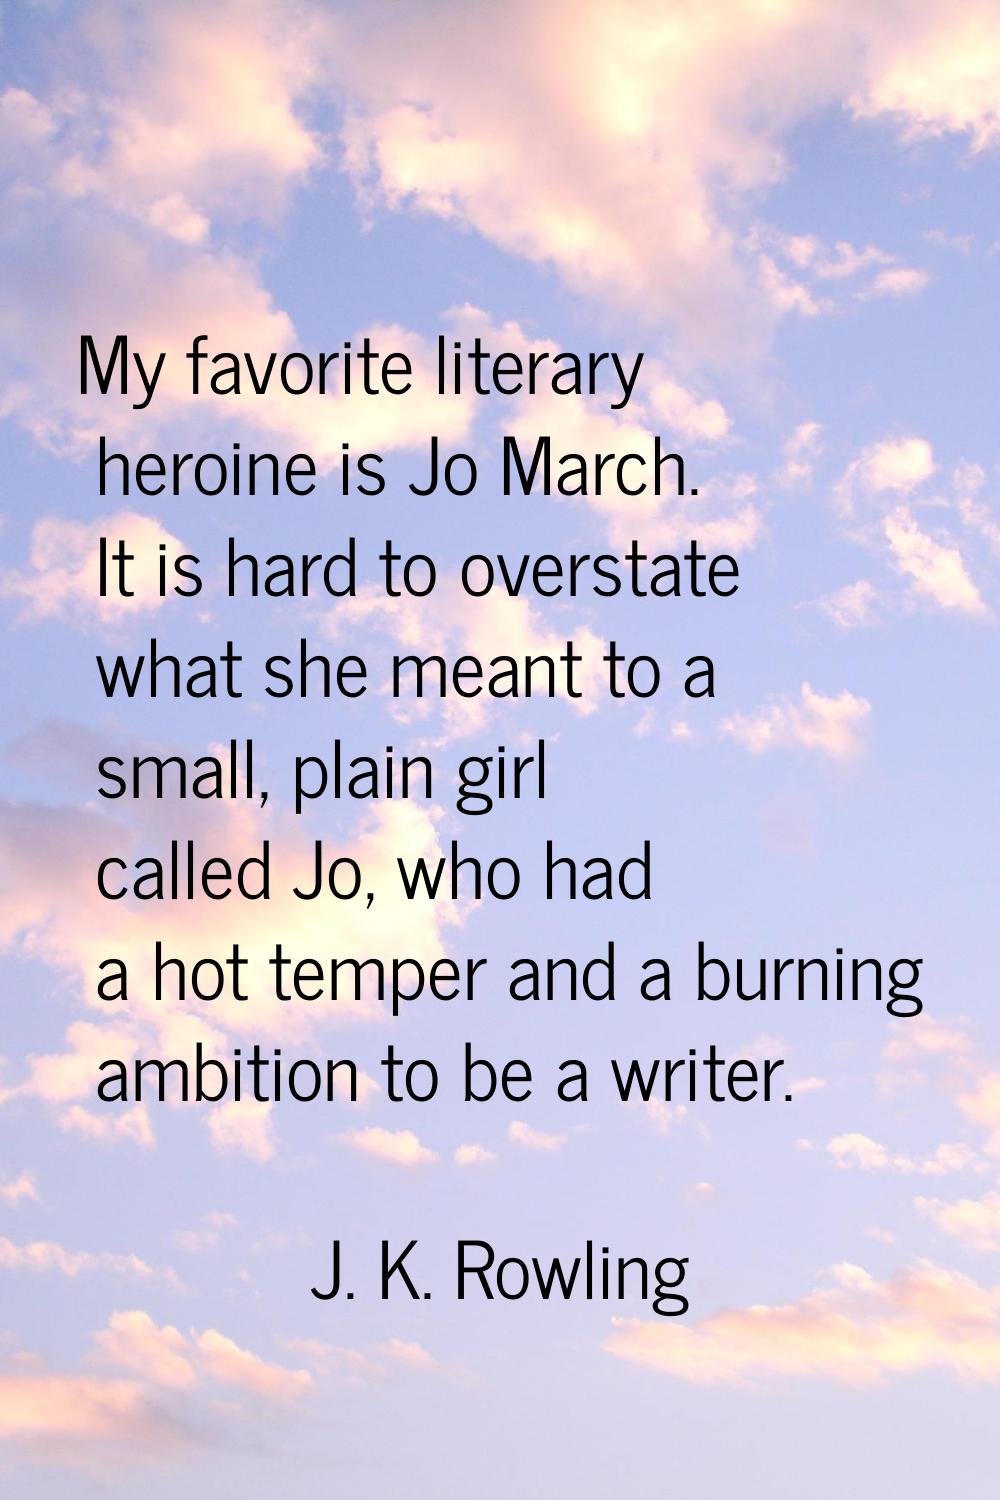 My favorite literary heroine is Jo March. It is hard to overstate what she meant to a small, plain 